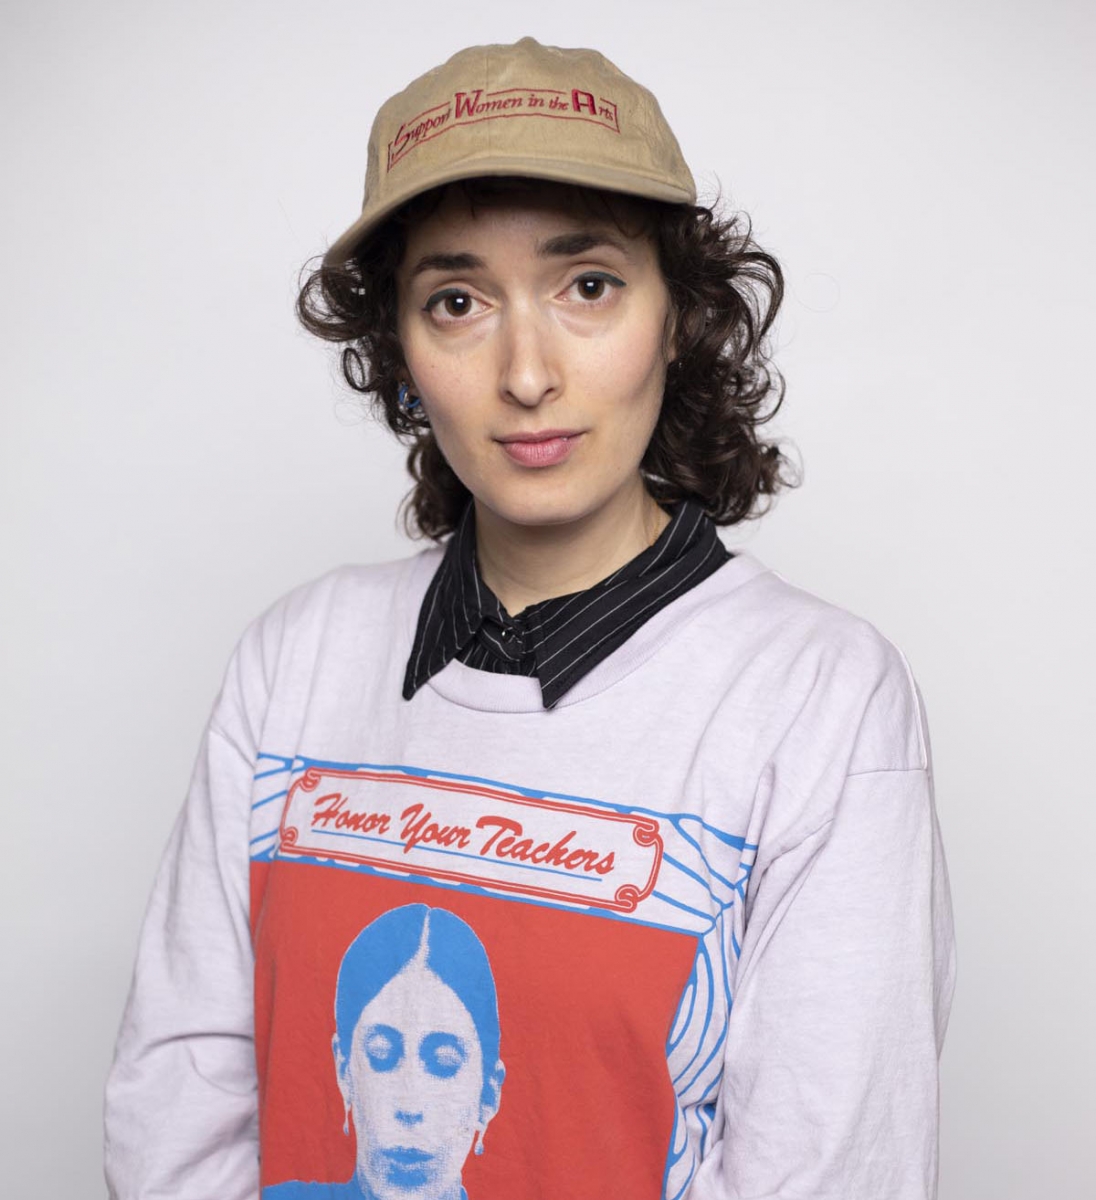 Person with dark curly hair wearing a tan baseball cap and longsleeve white shirt with text Honor Your Teachers and a red and blue silkscreen of a schoolteacher.